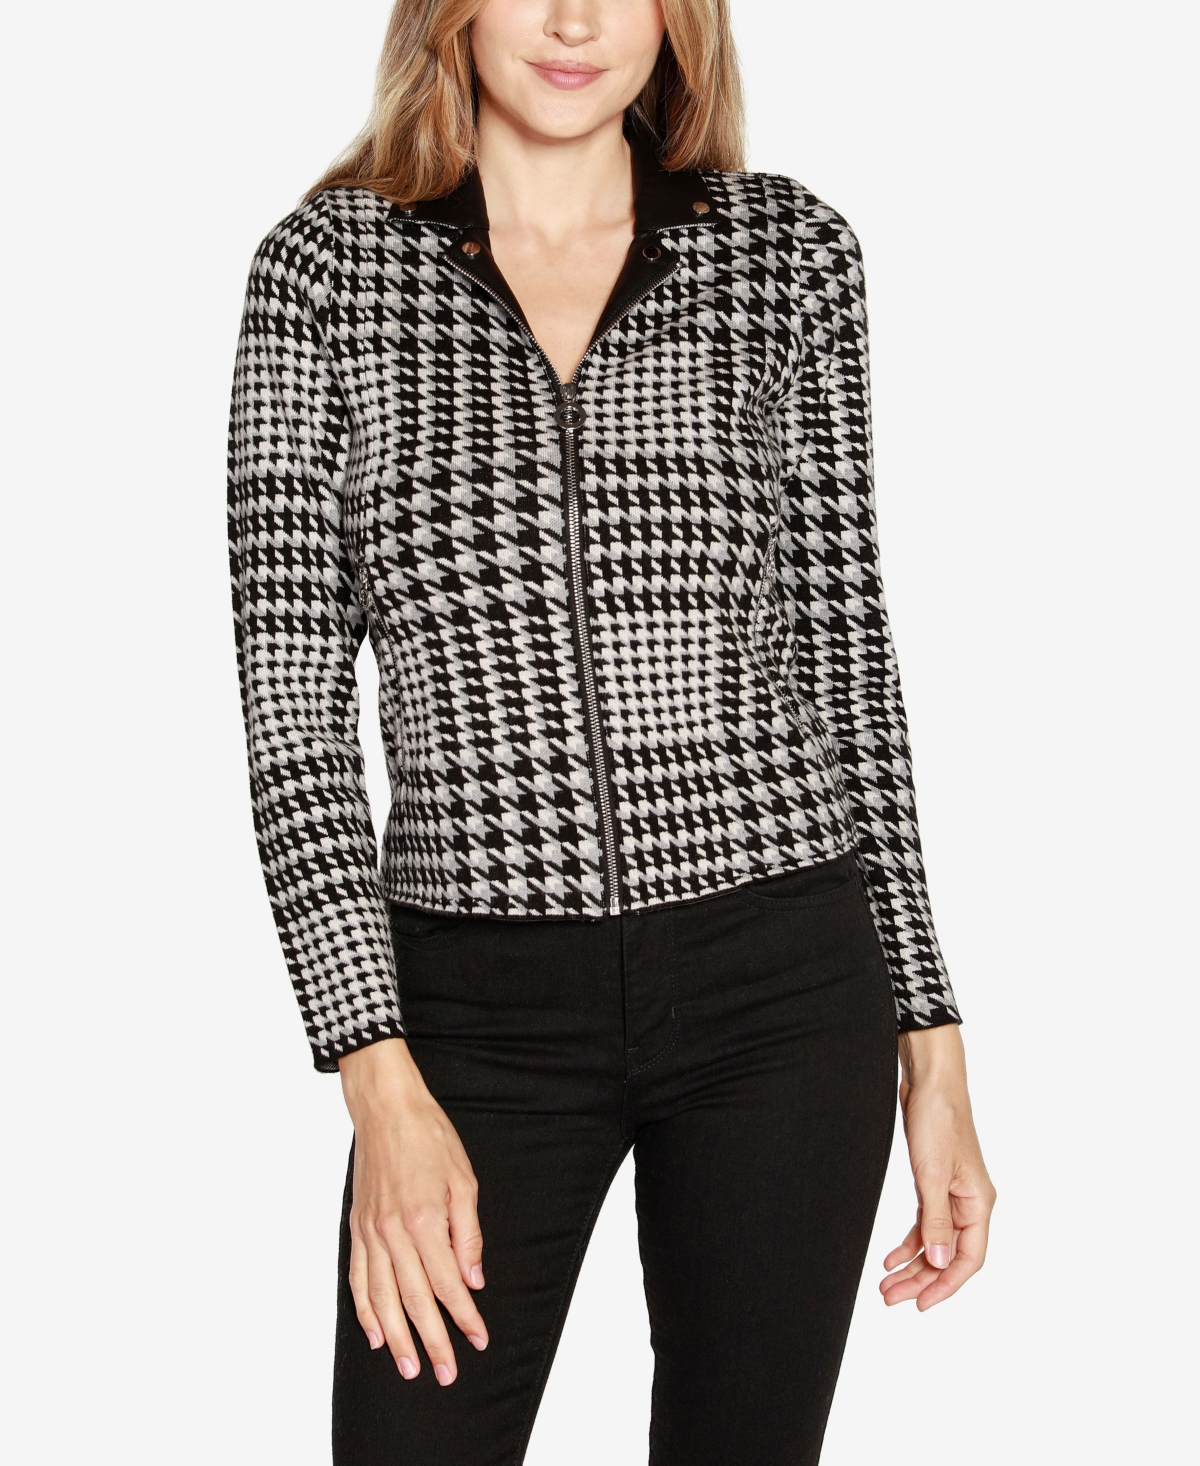 Belldini Black Label Women's Houndstooth Motorcycle Sweater In Black Combo